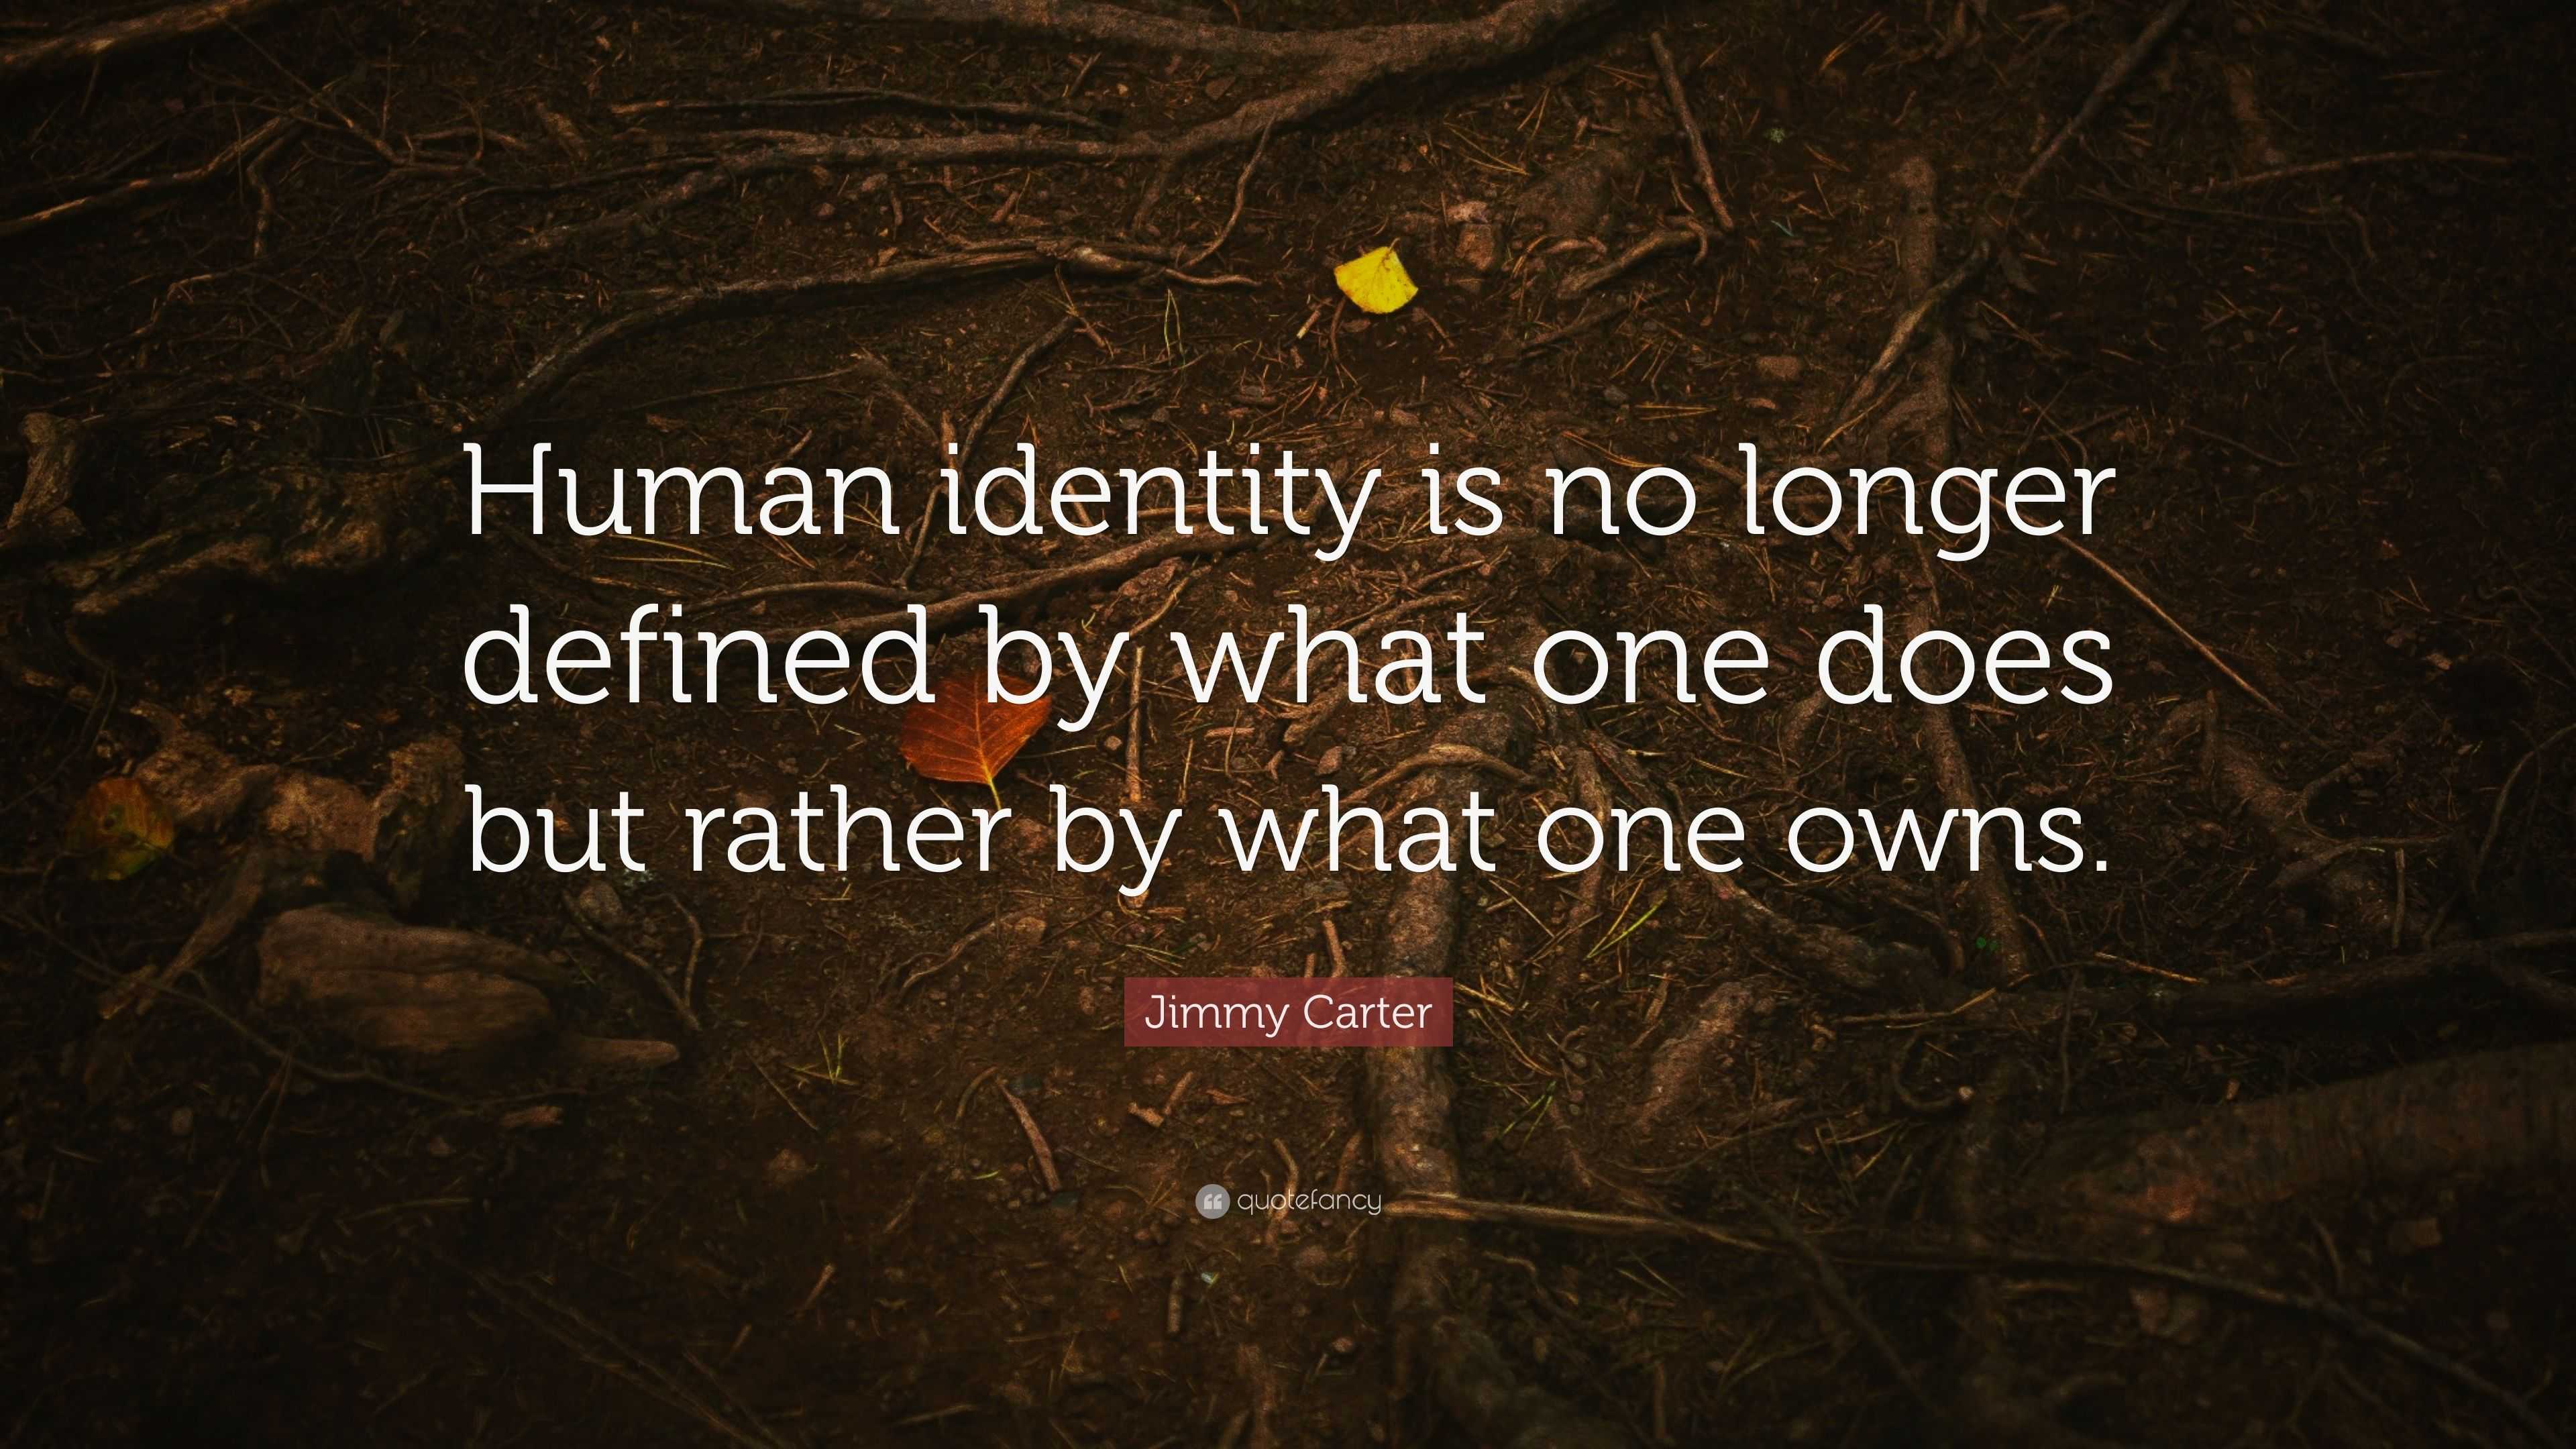 Jimmy Carter Quote: “Human identity is no longer defined by what one